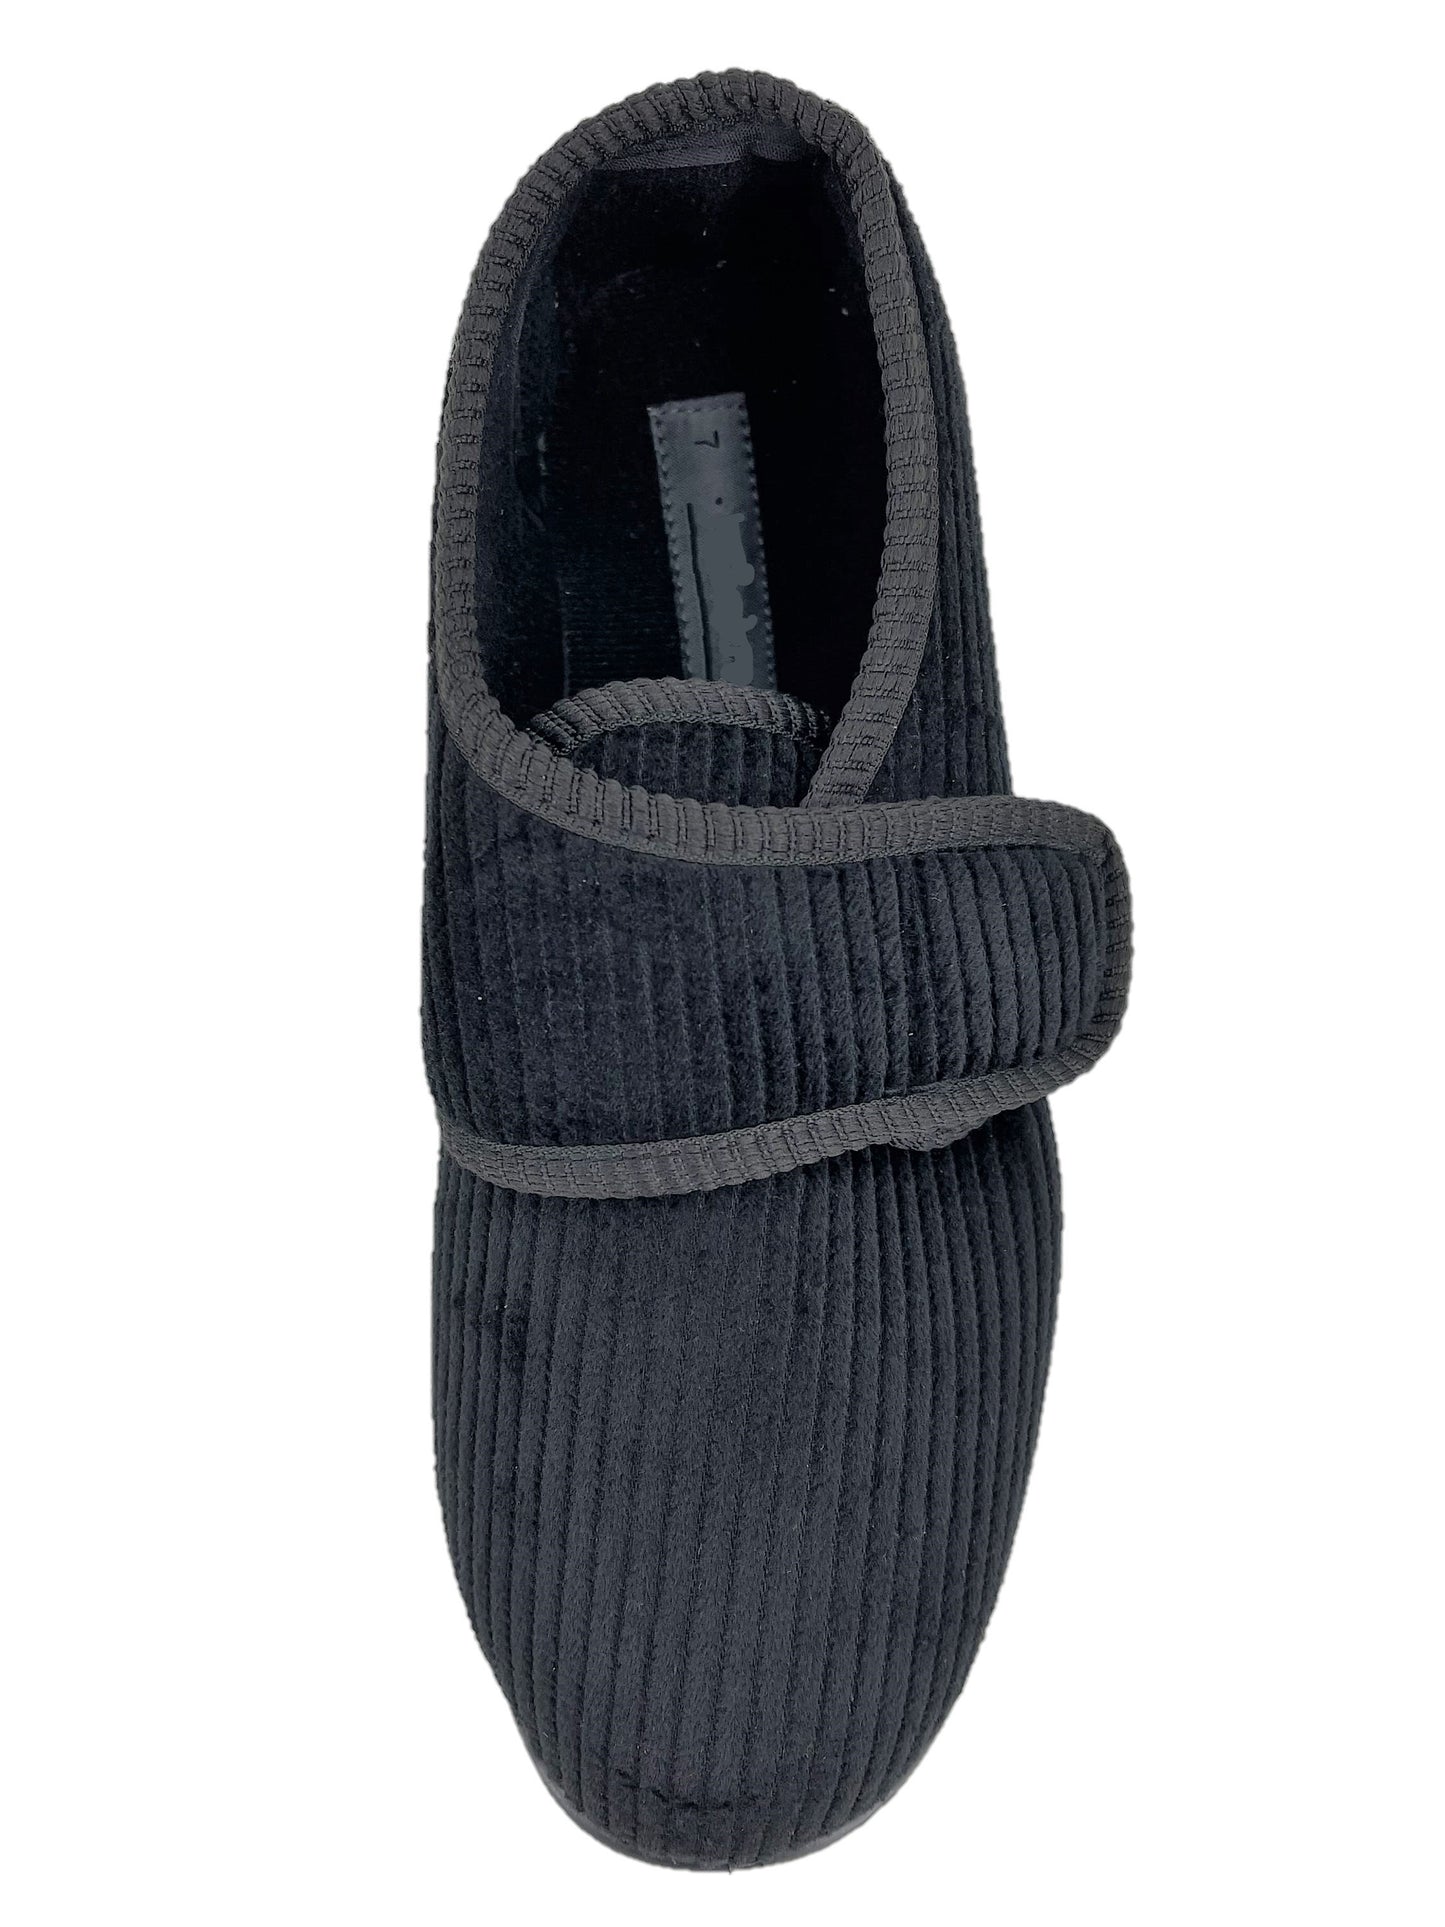 Men's Easy Access Black Corduroy Touch-and-Close Strap Slippers House Shoes